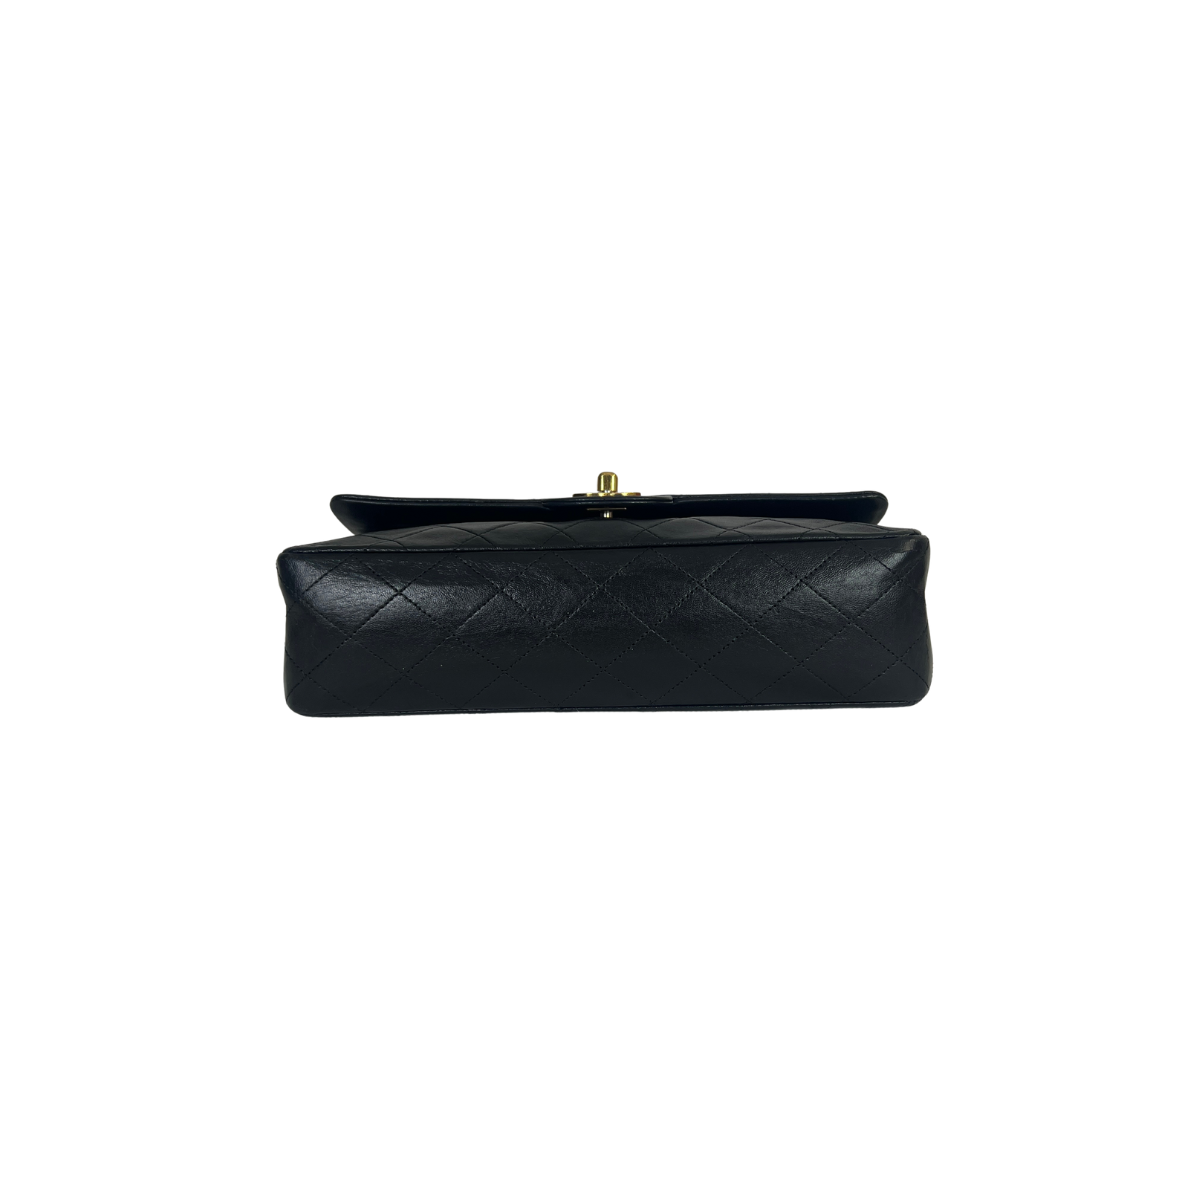 Black Quilted Lambskin Classic Flap Coin Purse